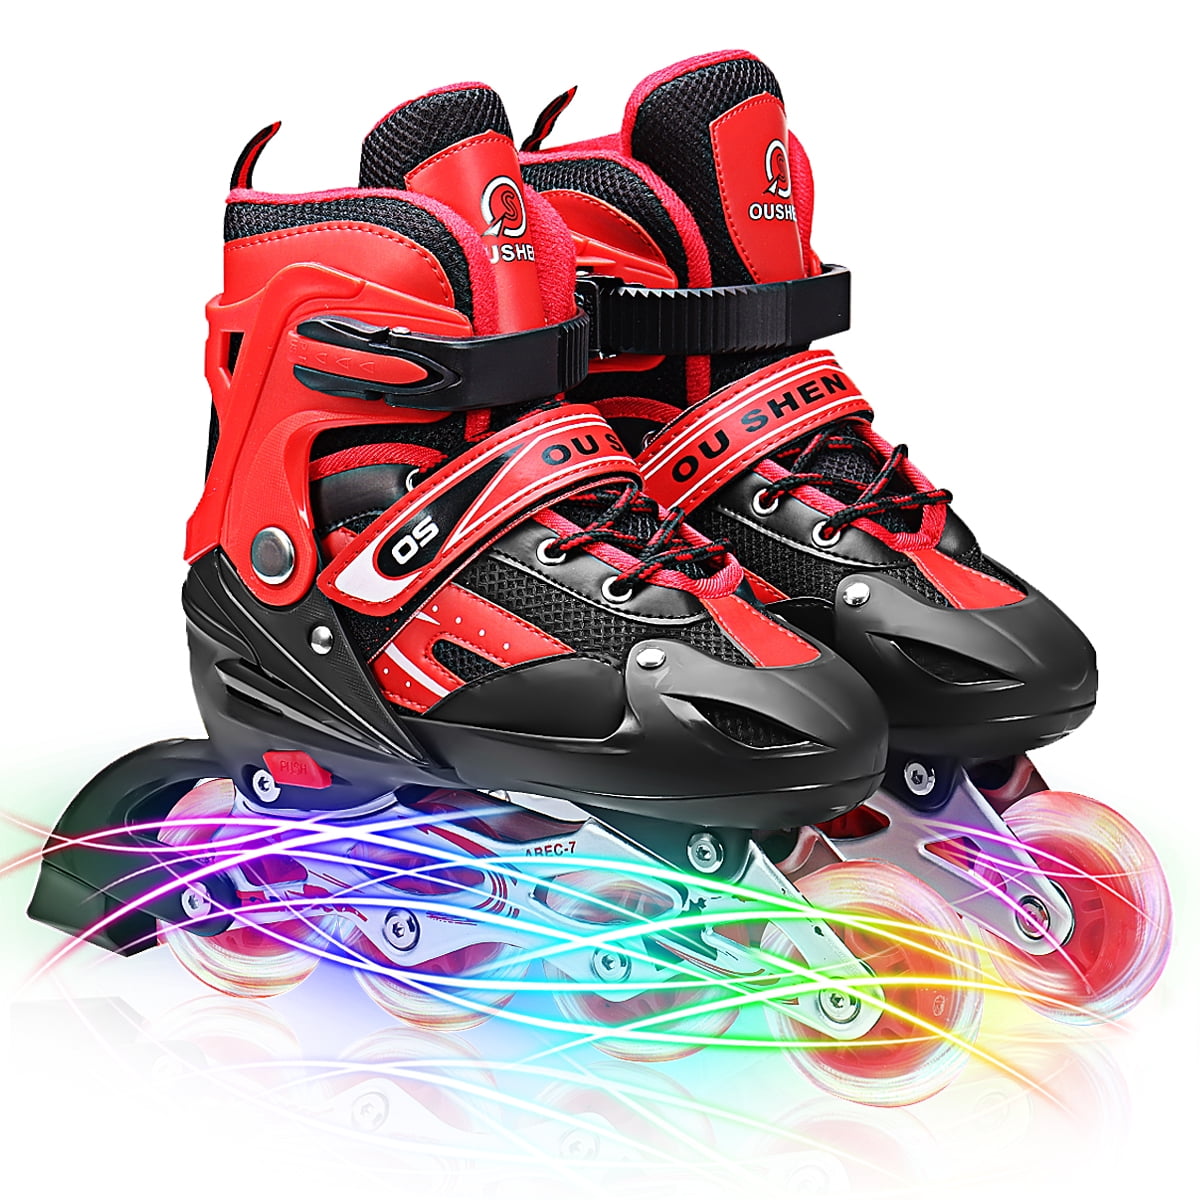 Adjustable Inline Skates with Light up Wheels Beginner Skates Roller Skates for Kids Boys and Young Adults Outdoor Rollerskates for Beginners & Advanced